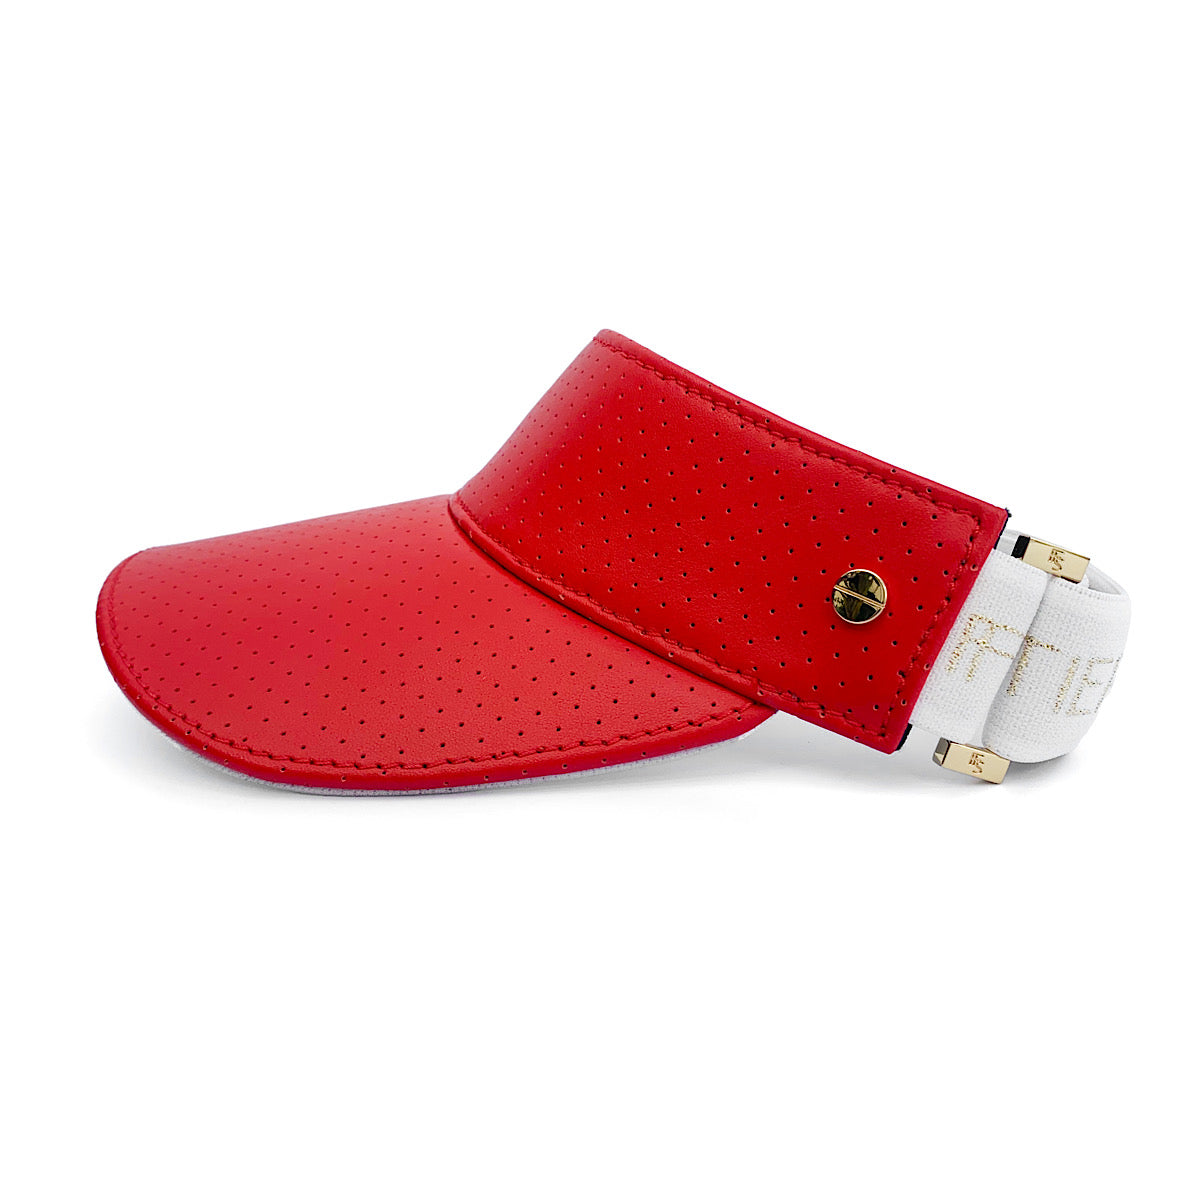 The Visor - Parrot Red Leather / White & Gold